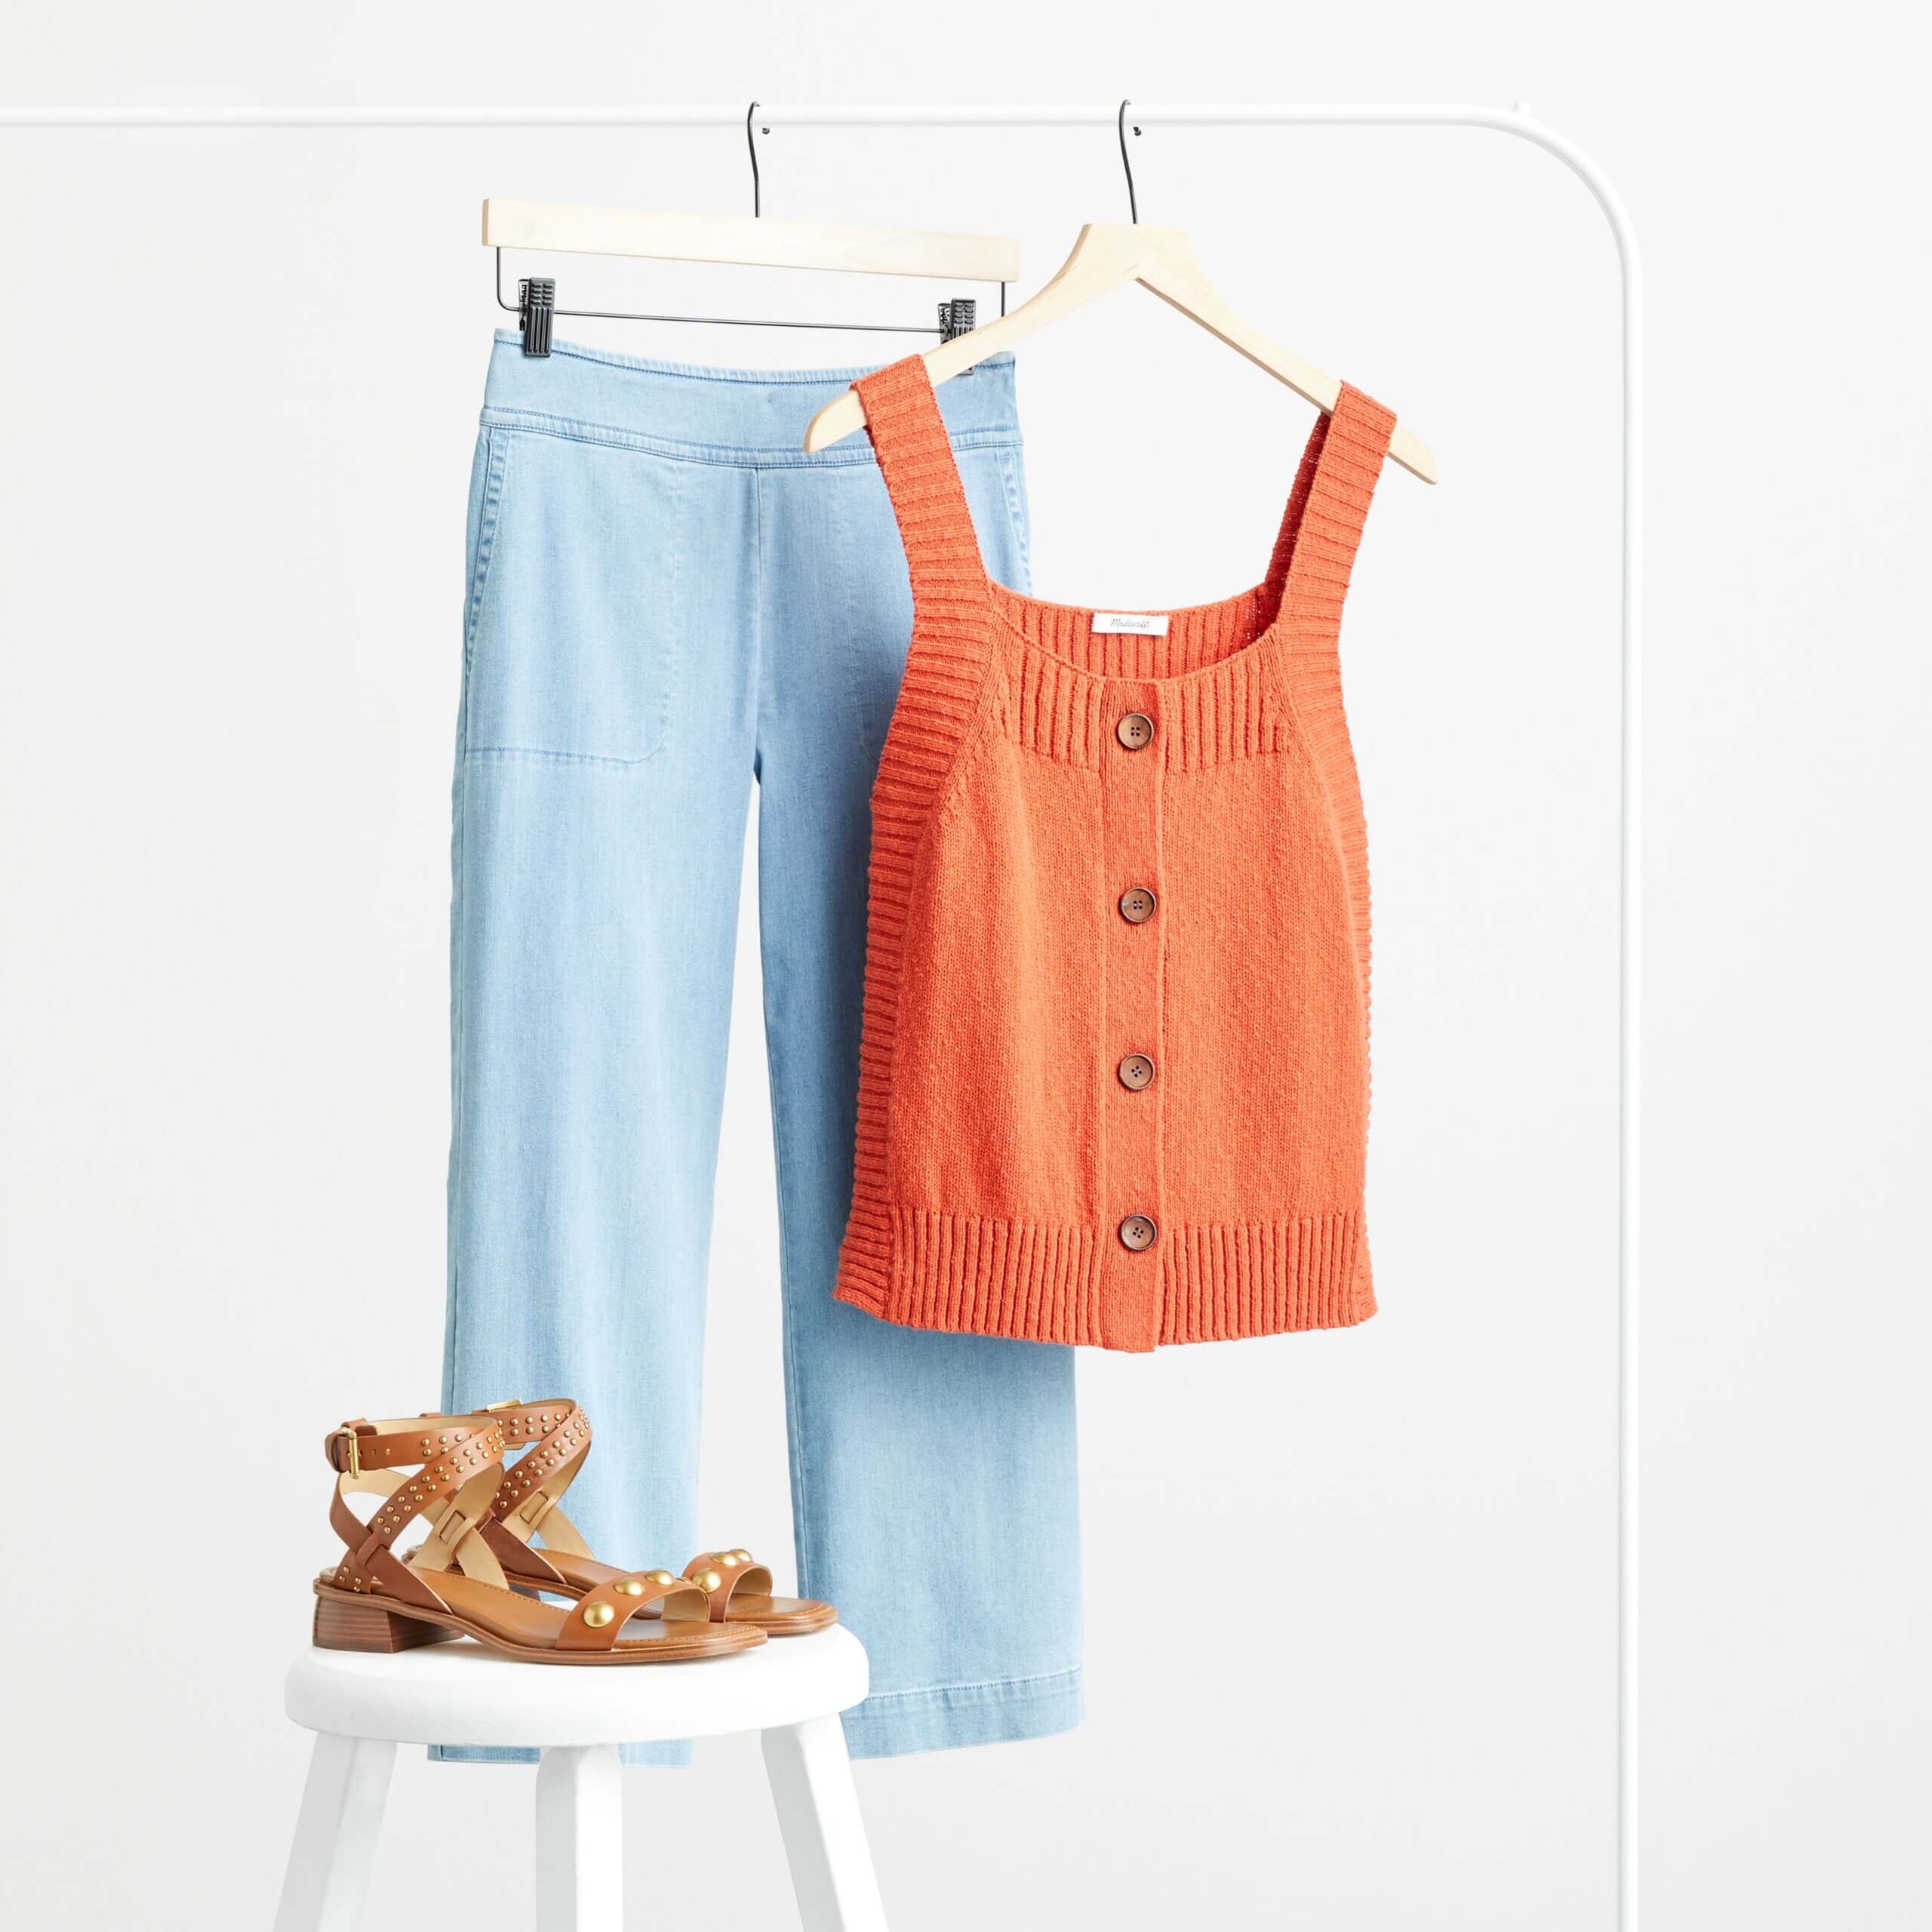 Stitch Fix Women’s cropped wide-leg jeans with orange button front tank top and brown sandals on a white stool.